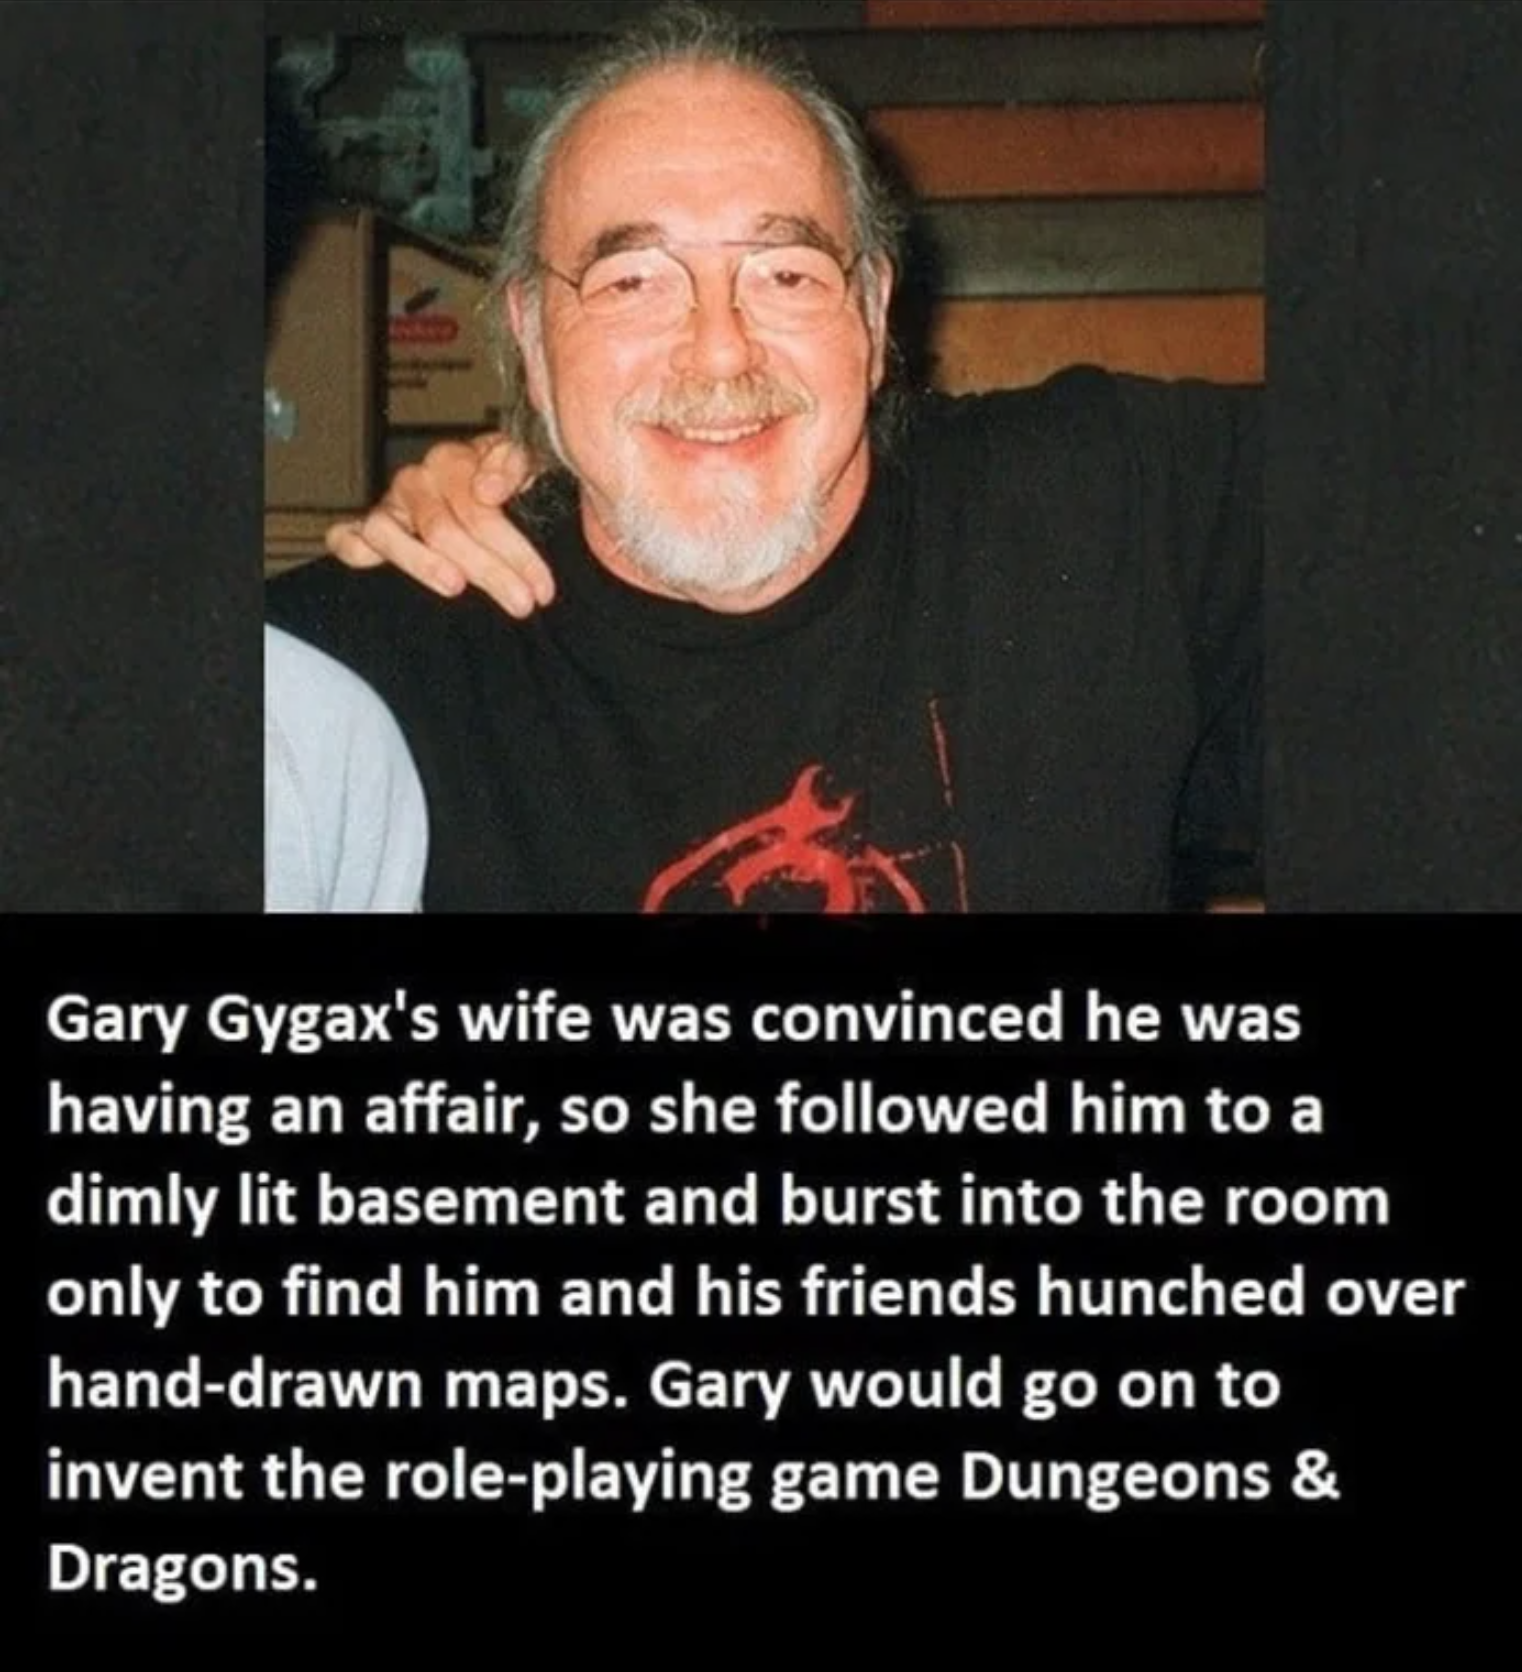 funny gaming memes - person - Gary Gygax's wife was convinced he was having an affair, so she ed him to a dimly lit basement and burst into the room only to find him and his friends hunched over handdrawn maps. Gary would go on to invent the roleplaying g